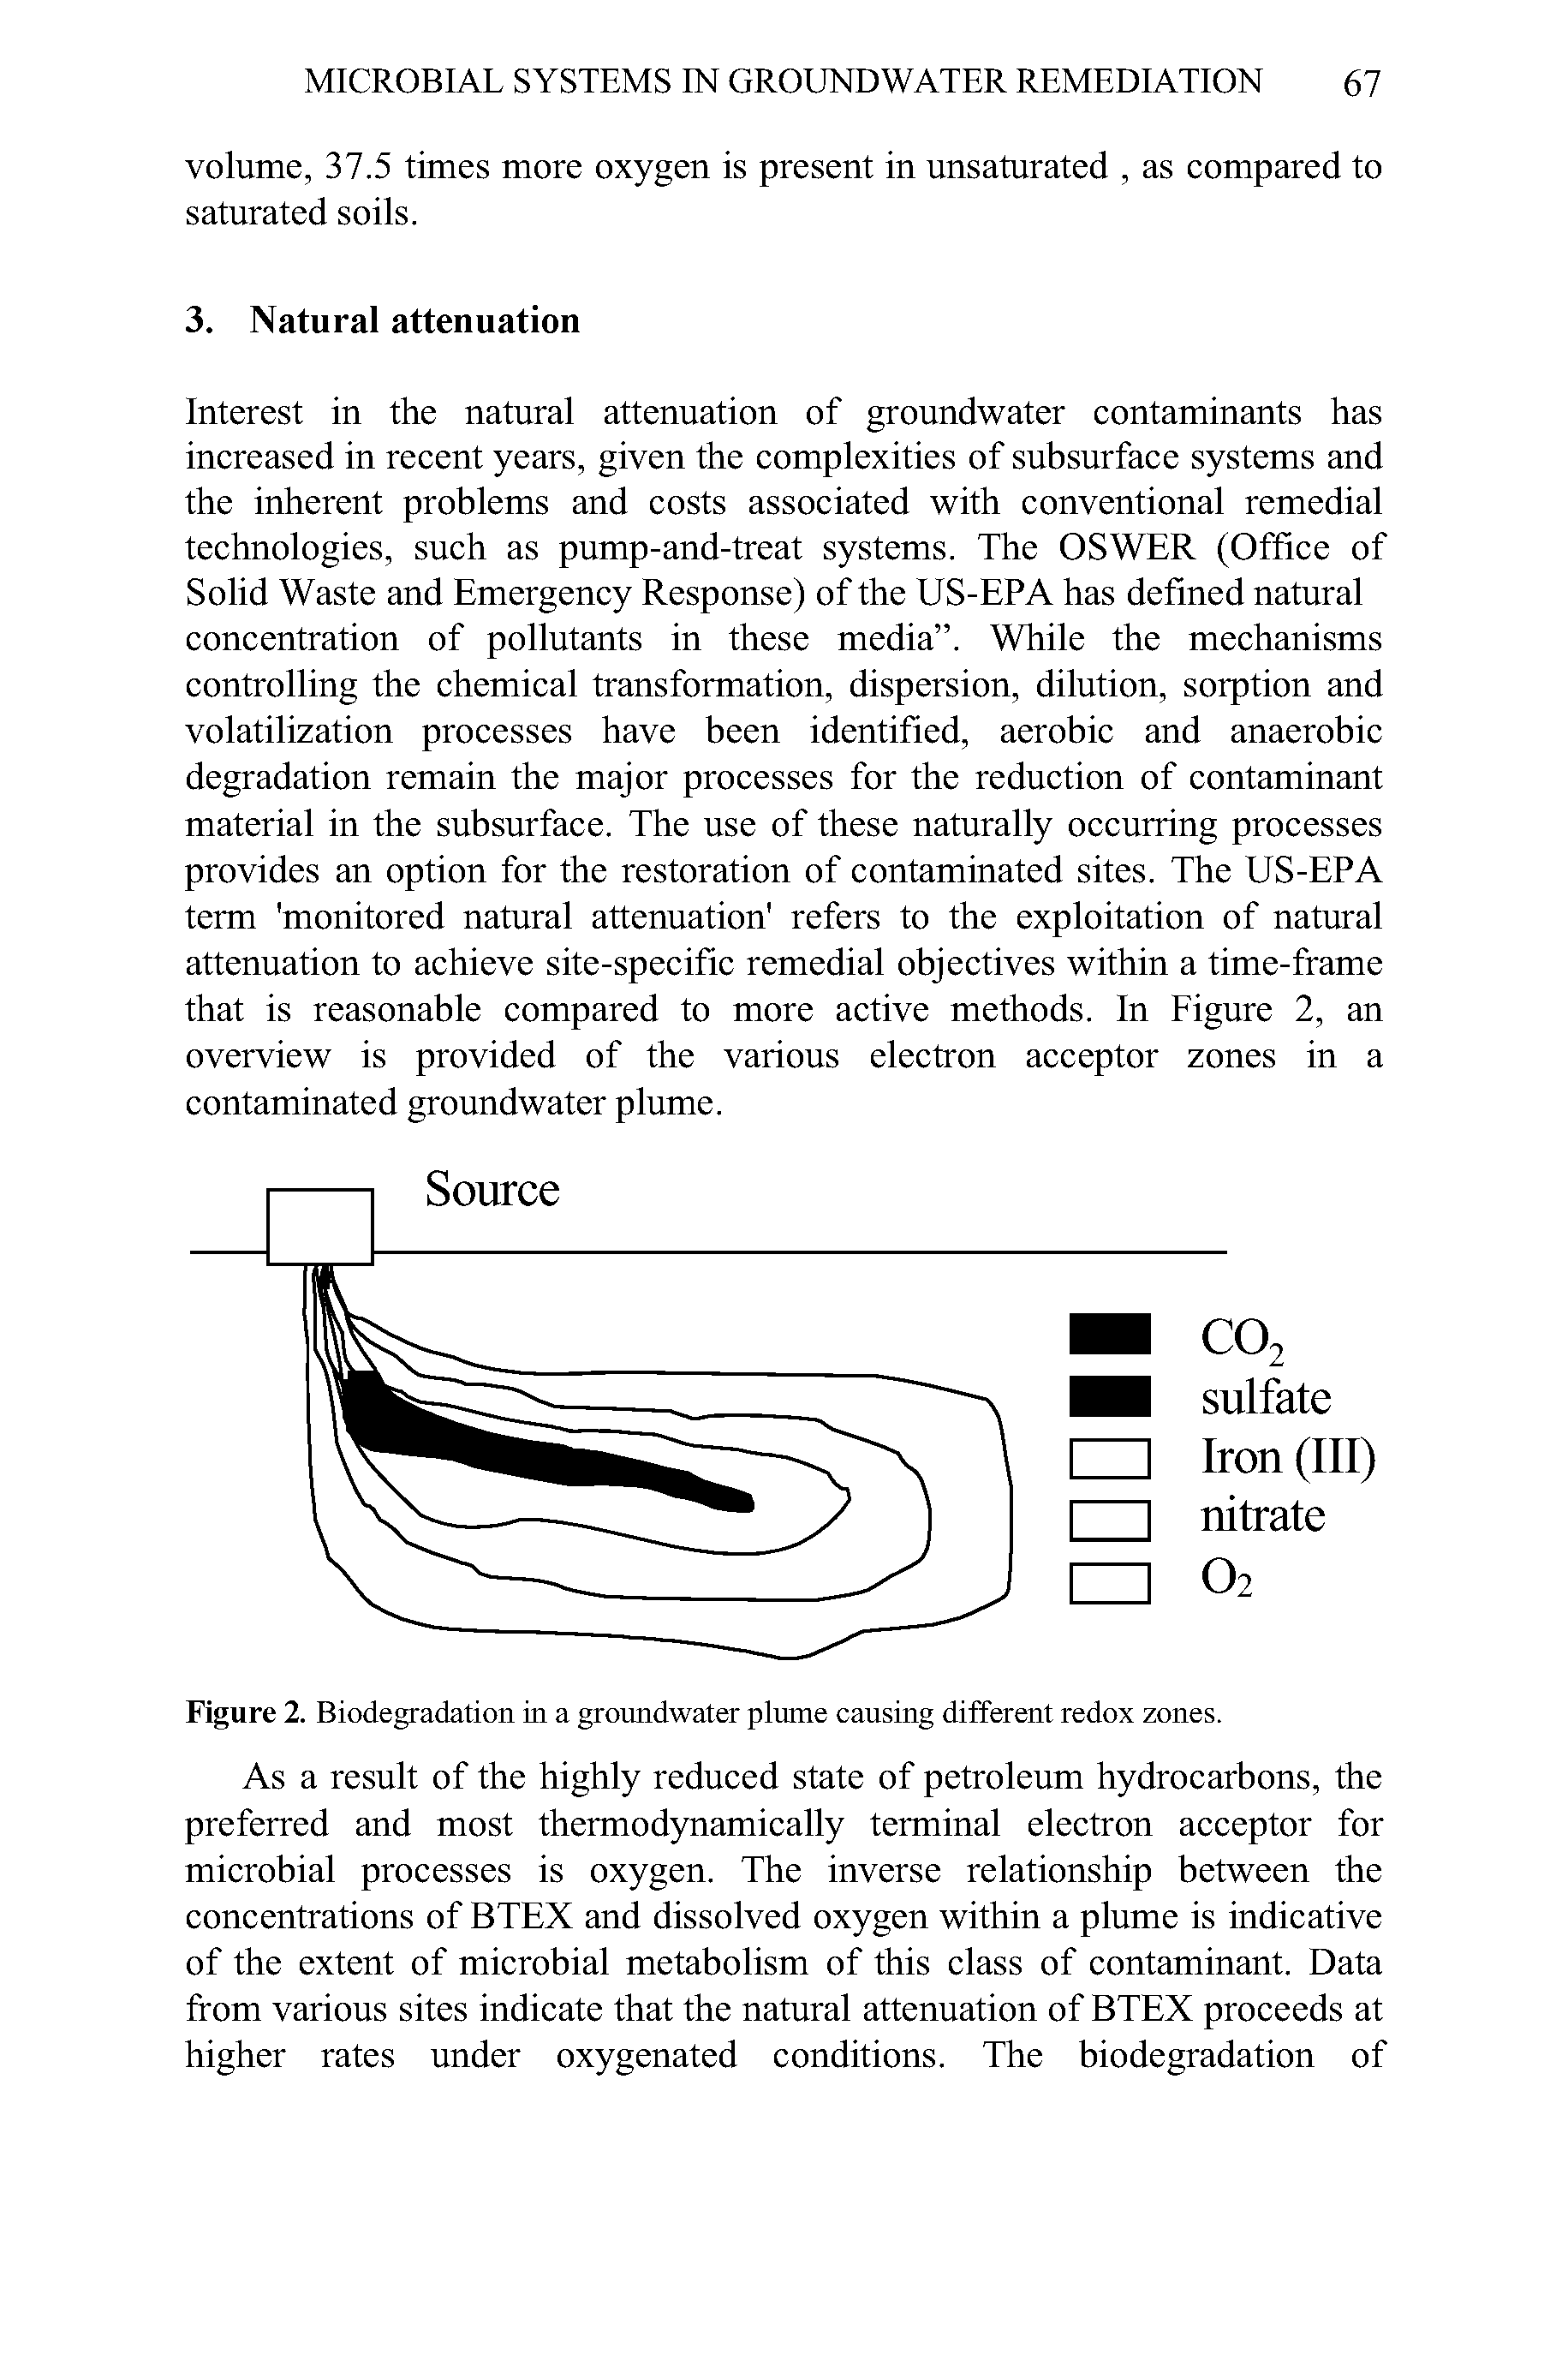 Figure 2. Biodegradation in a groundwater plume causing different redox zones.